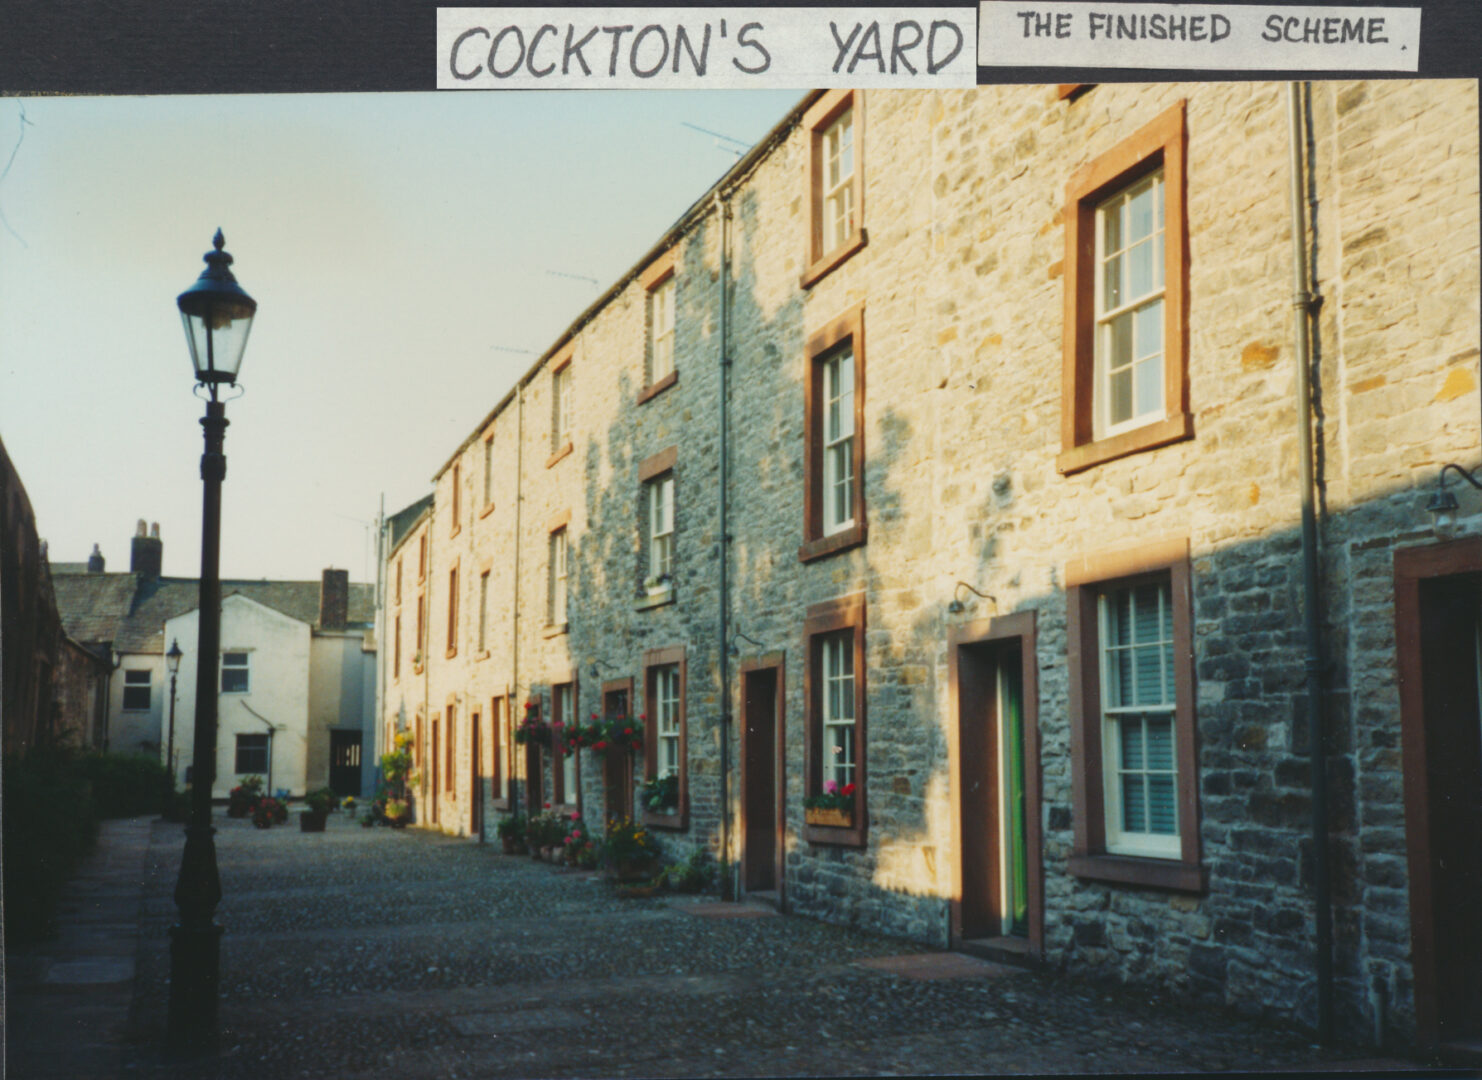 Cocktons Yard three floors high after renovation by North West Building Preservation Trust photo1986